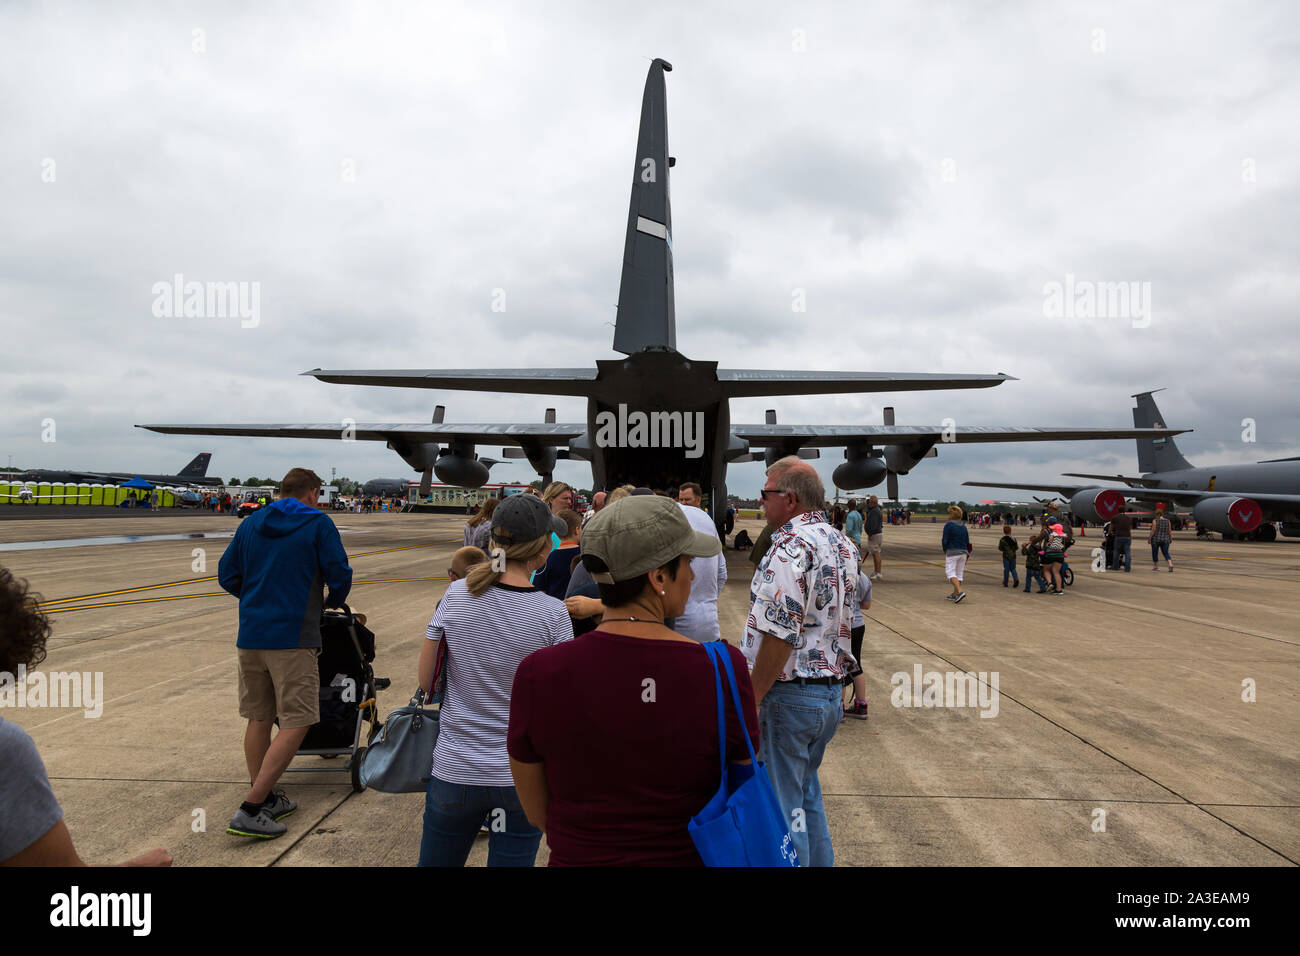 People line up to tour an iconic United States Air Force C-130 Hercules cargo plane at the Fort Wayne Airshow in Fort Wayne, Indiana, USA. Stock Photo